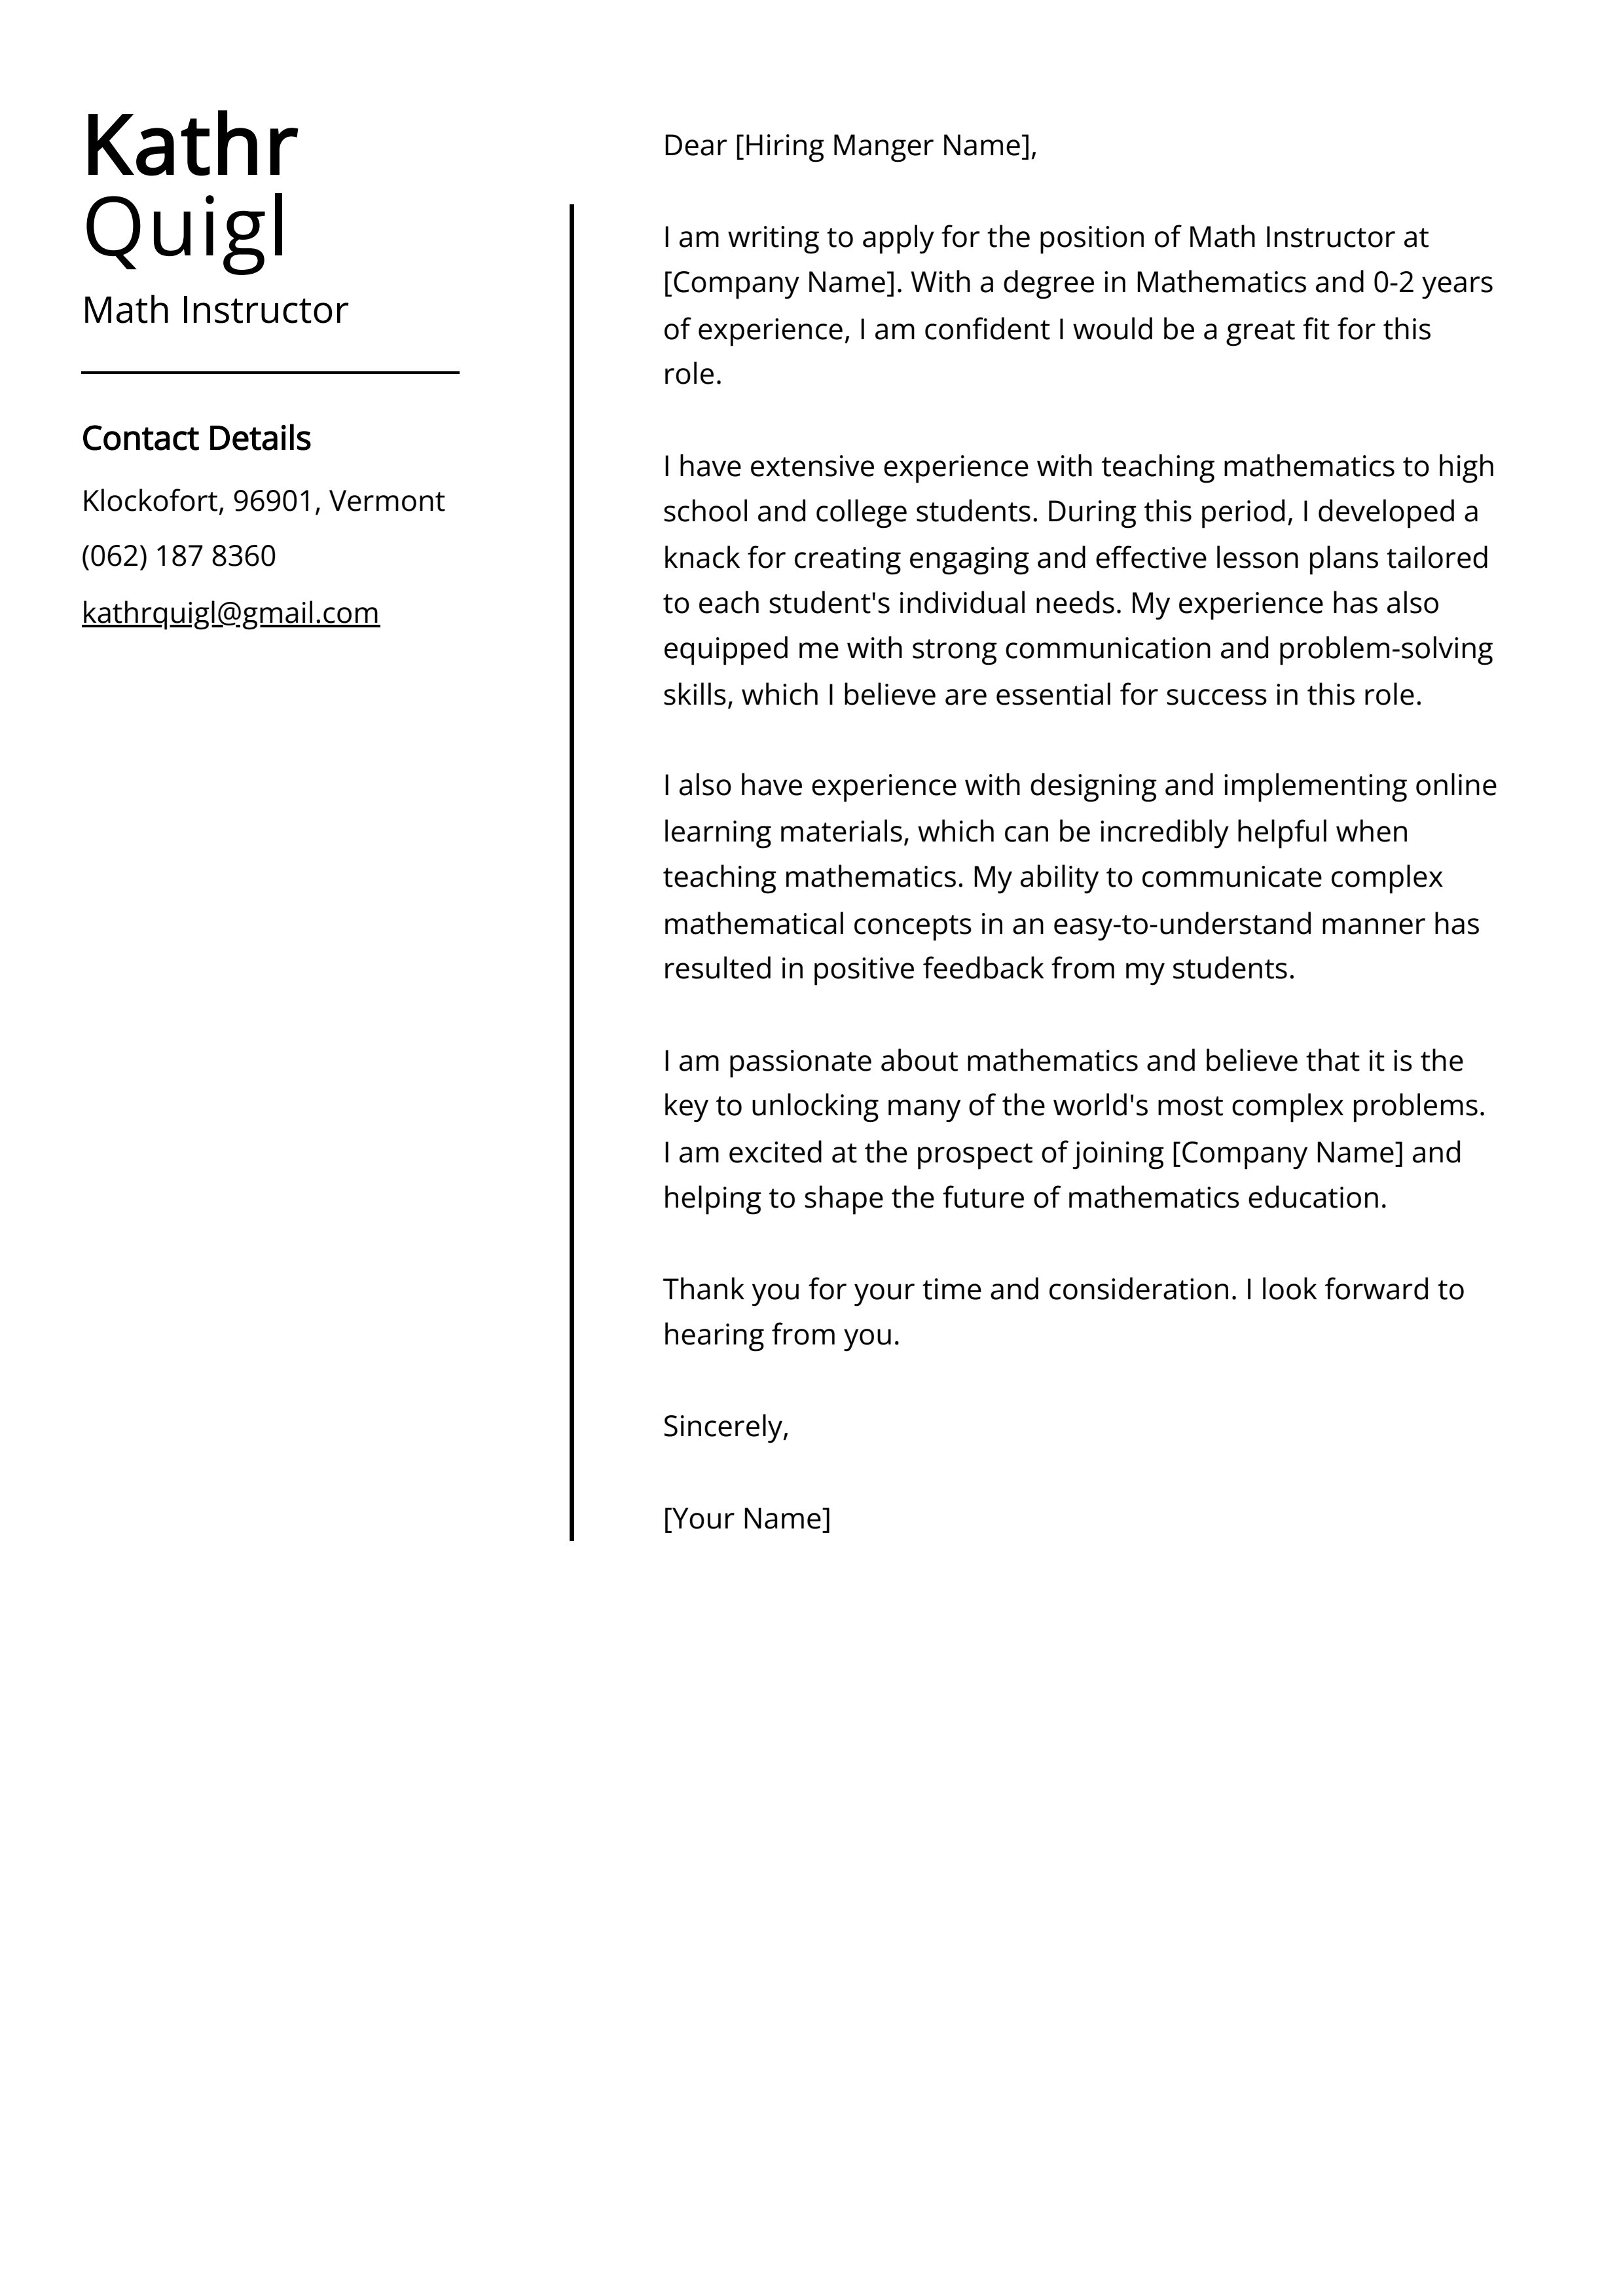 Math Instructor Cover Letter Example